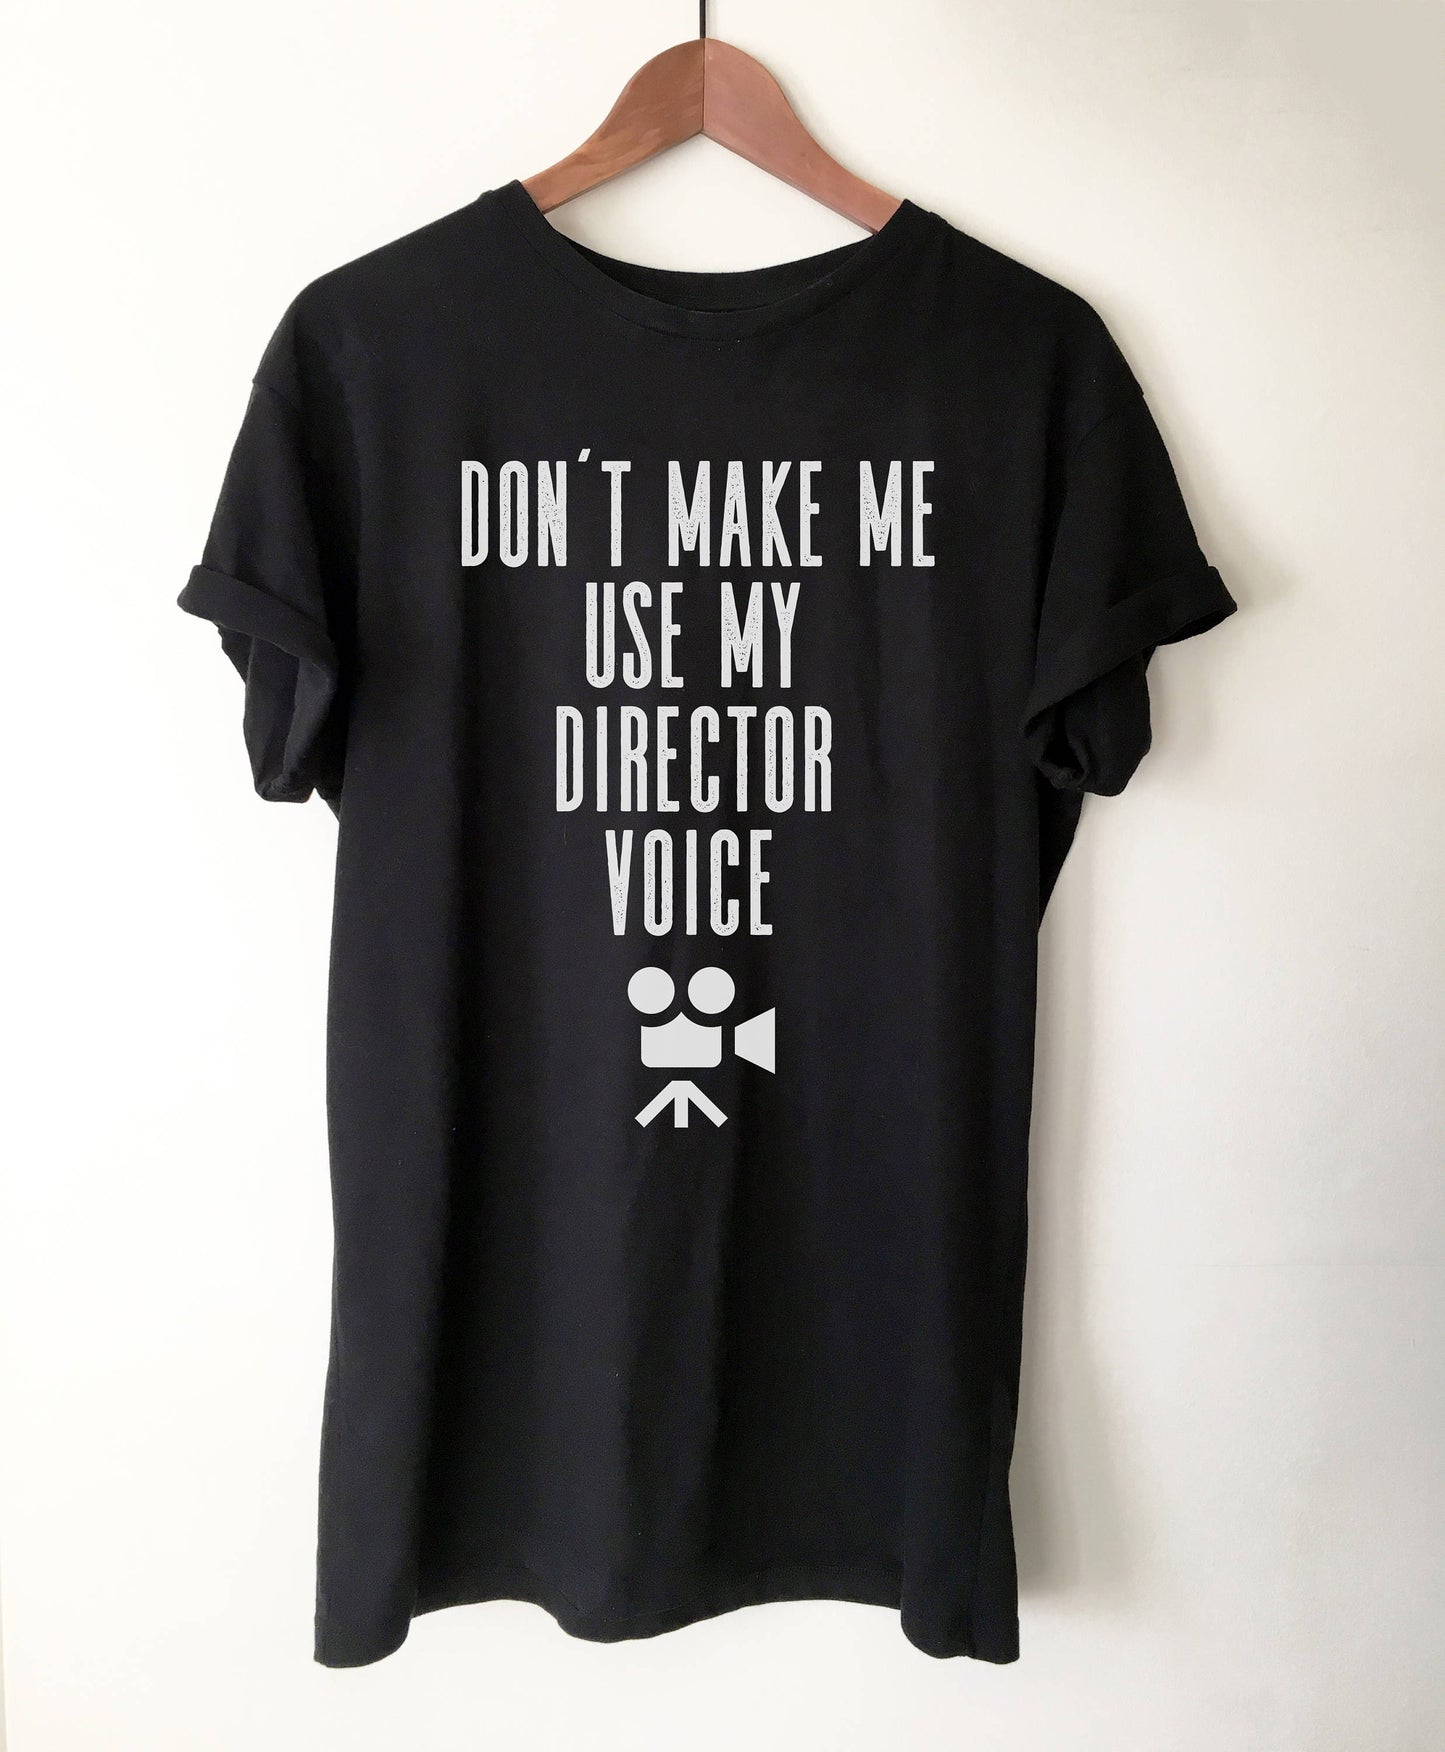 Don't Make Me Use My Director Voice Unisex Shirt - - Director Shirt, Director Gift, Film Shirt, Film Gift, Directing Shirt, Cameraman